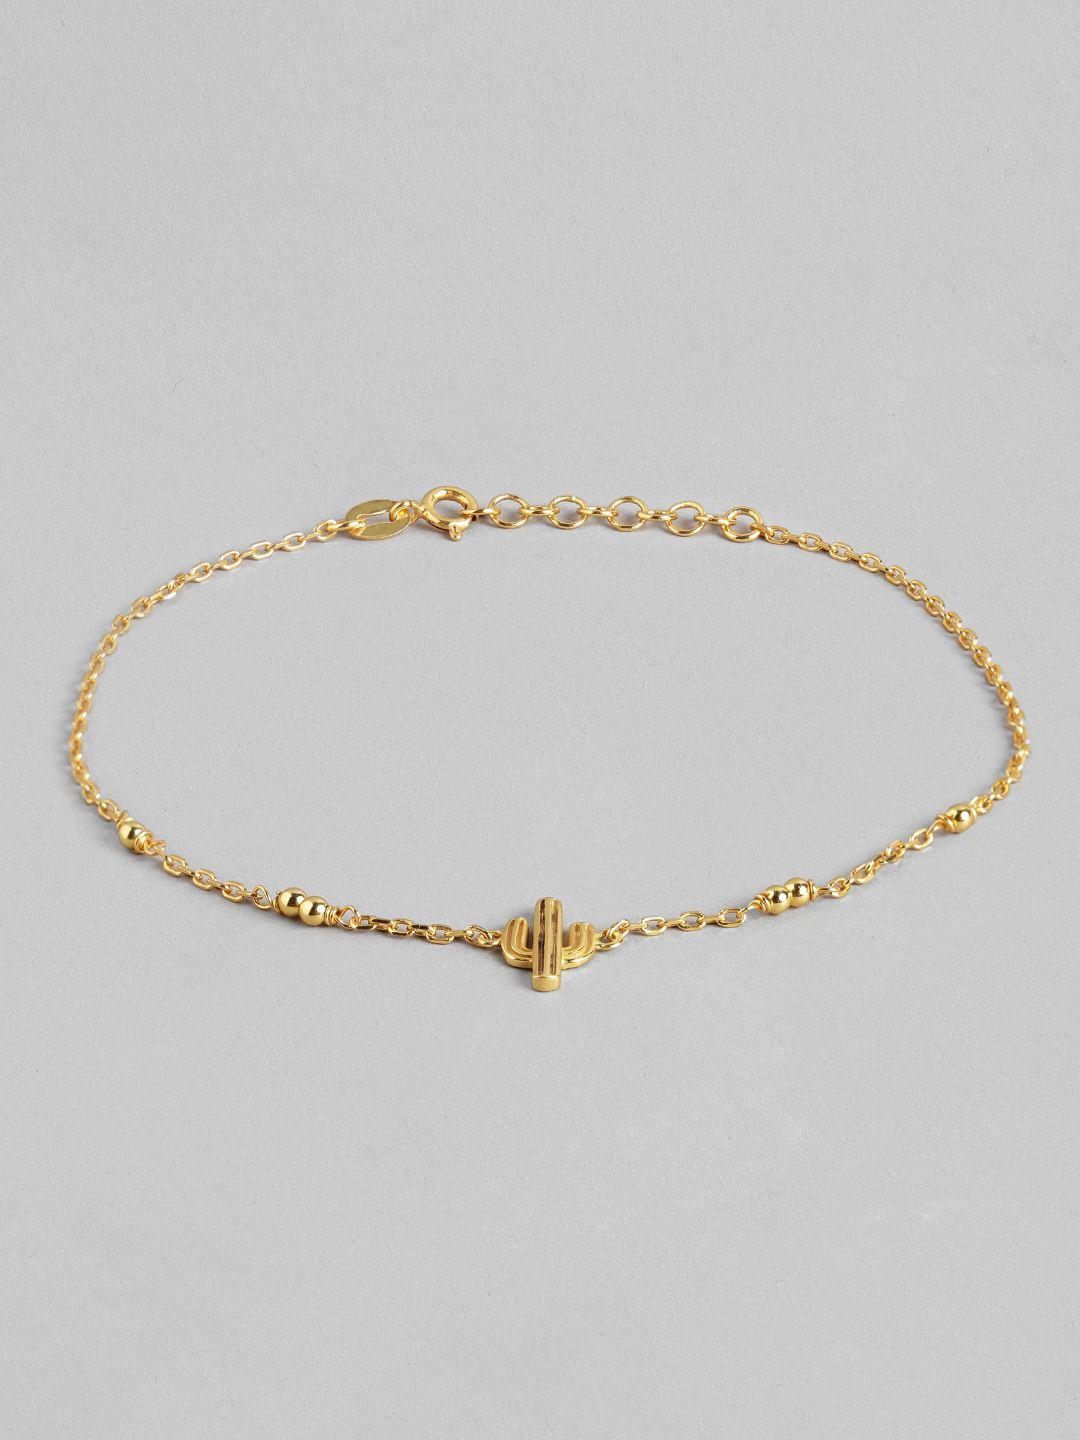 carlton london gold-plated handcrafted anklet